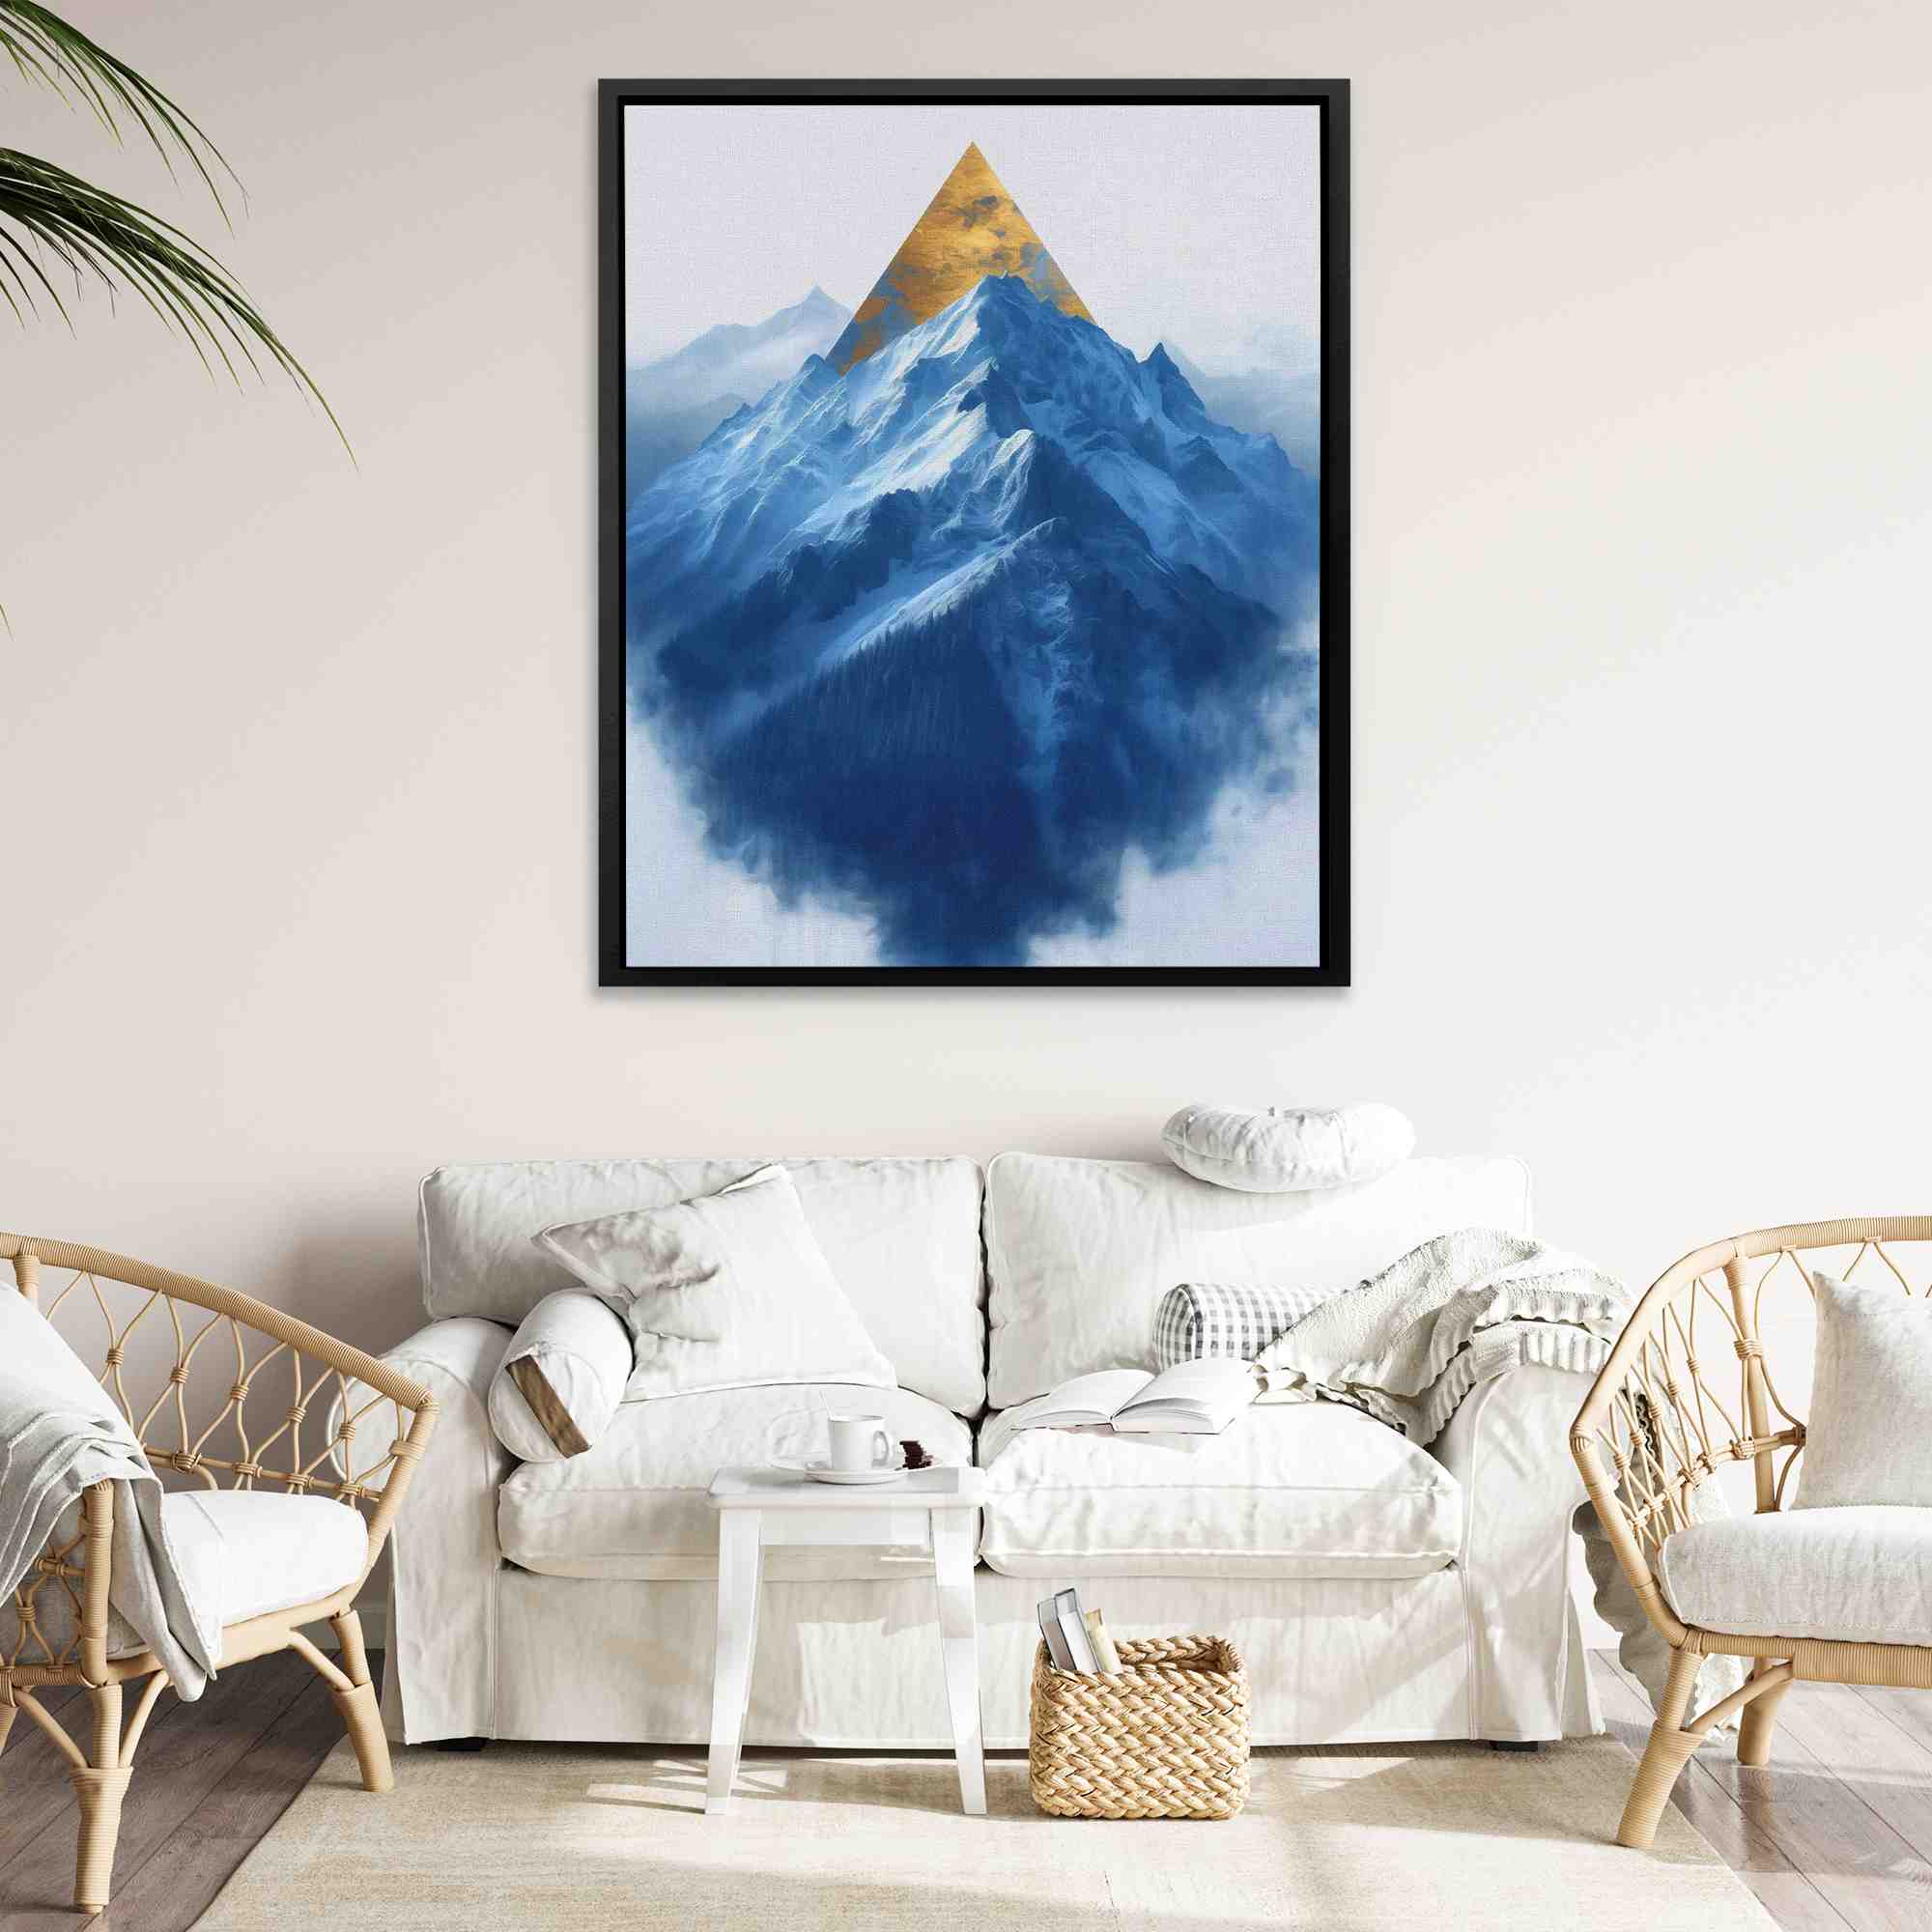 a painting of a mountain with a gold peak